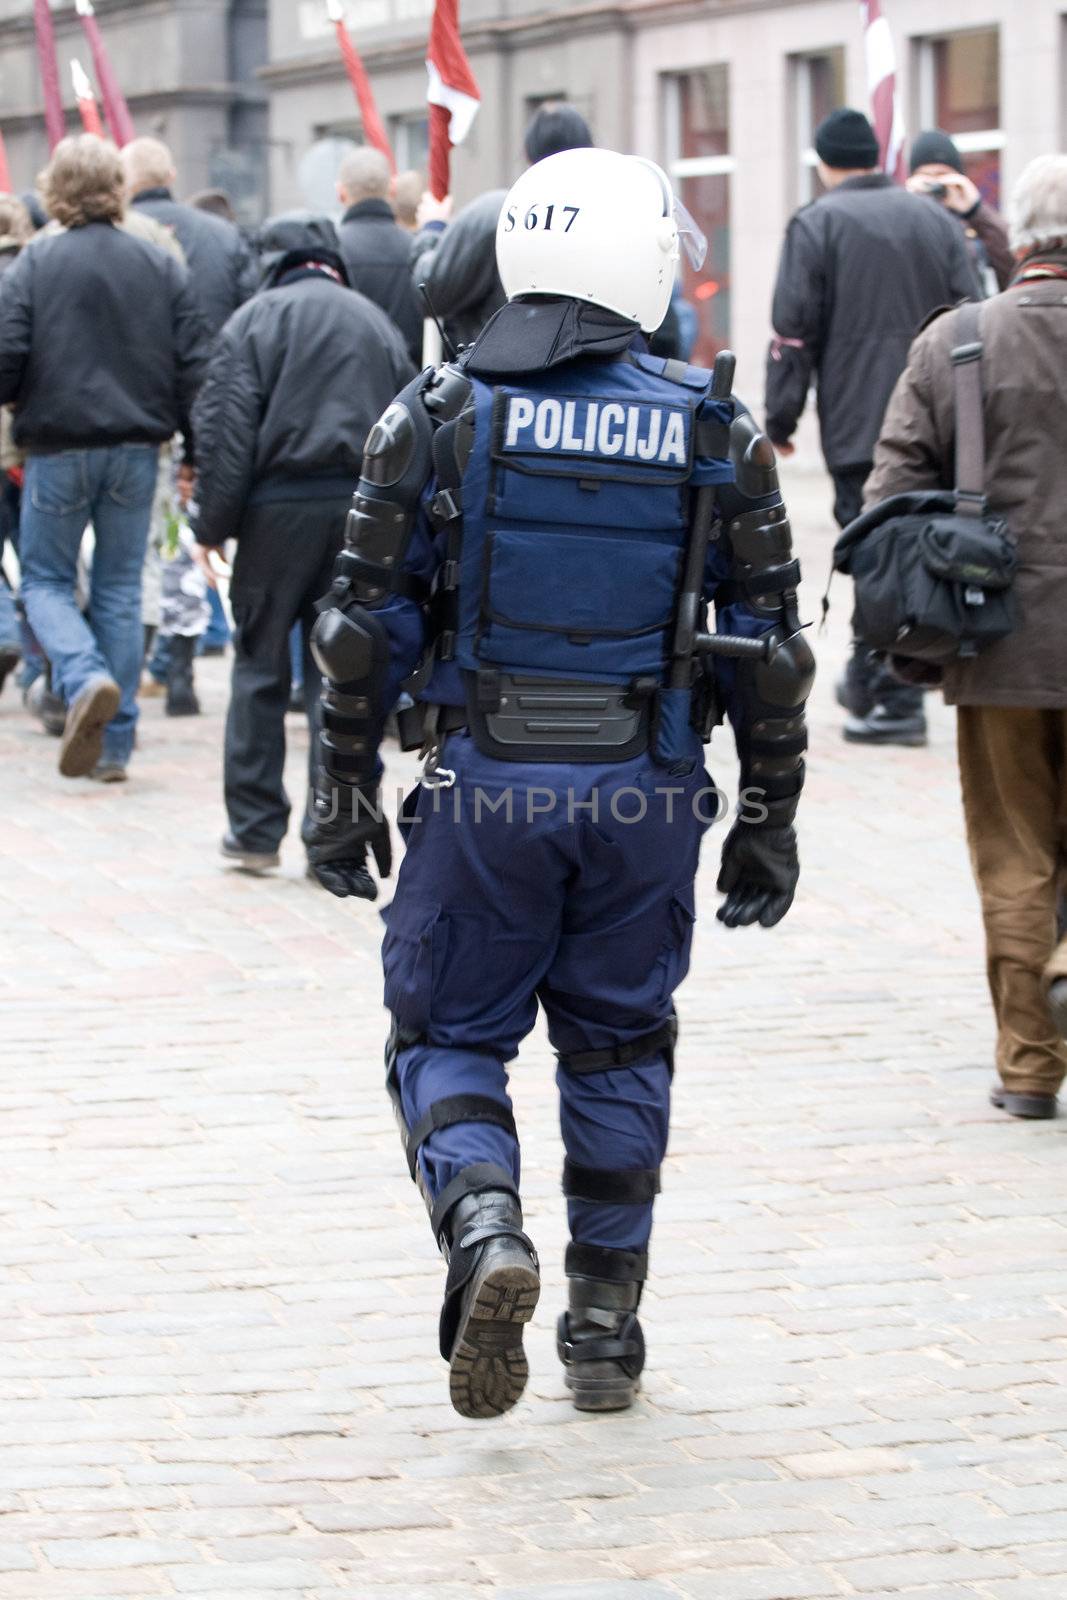 Riot police by ints